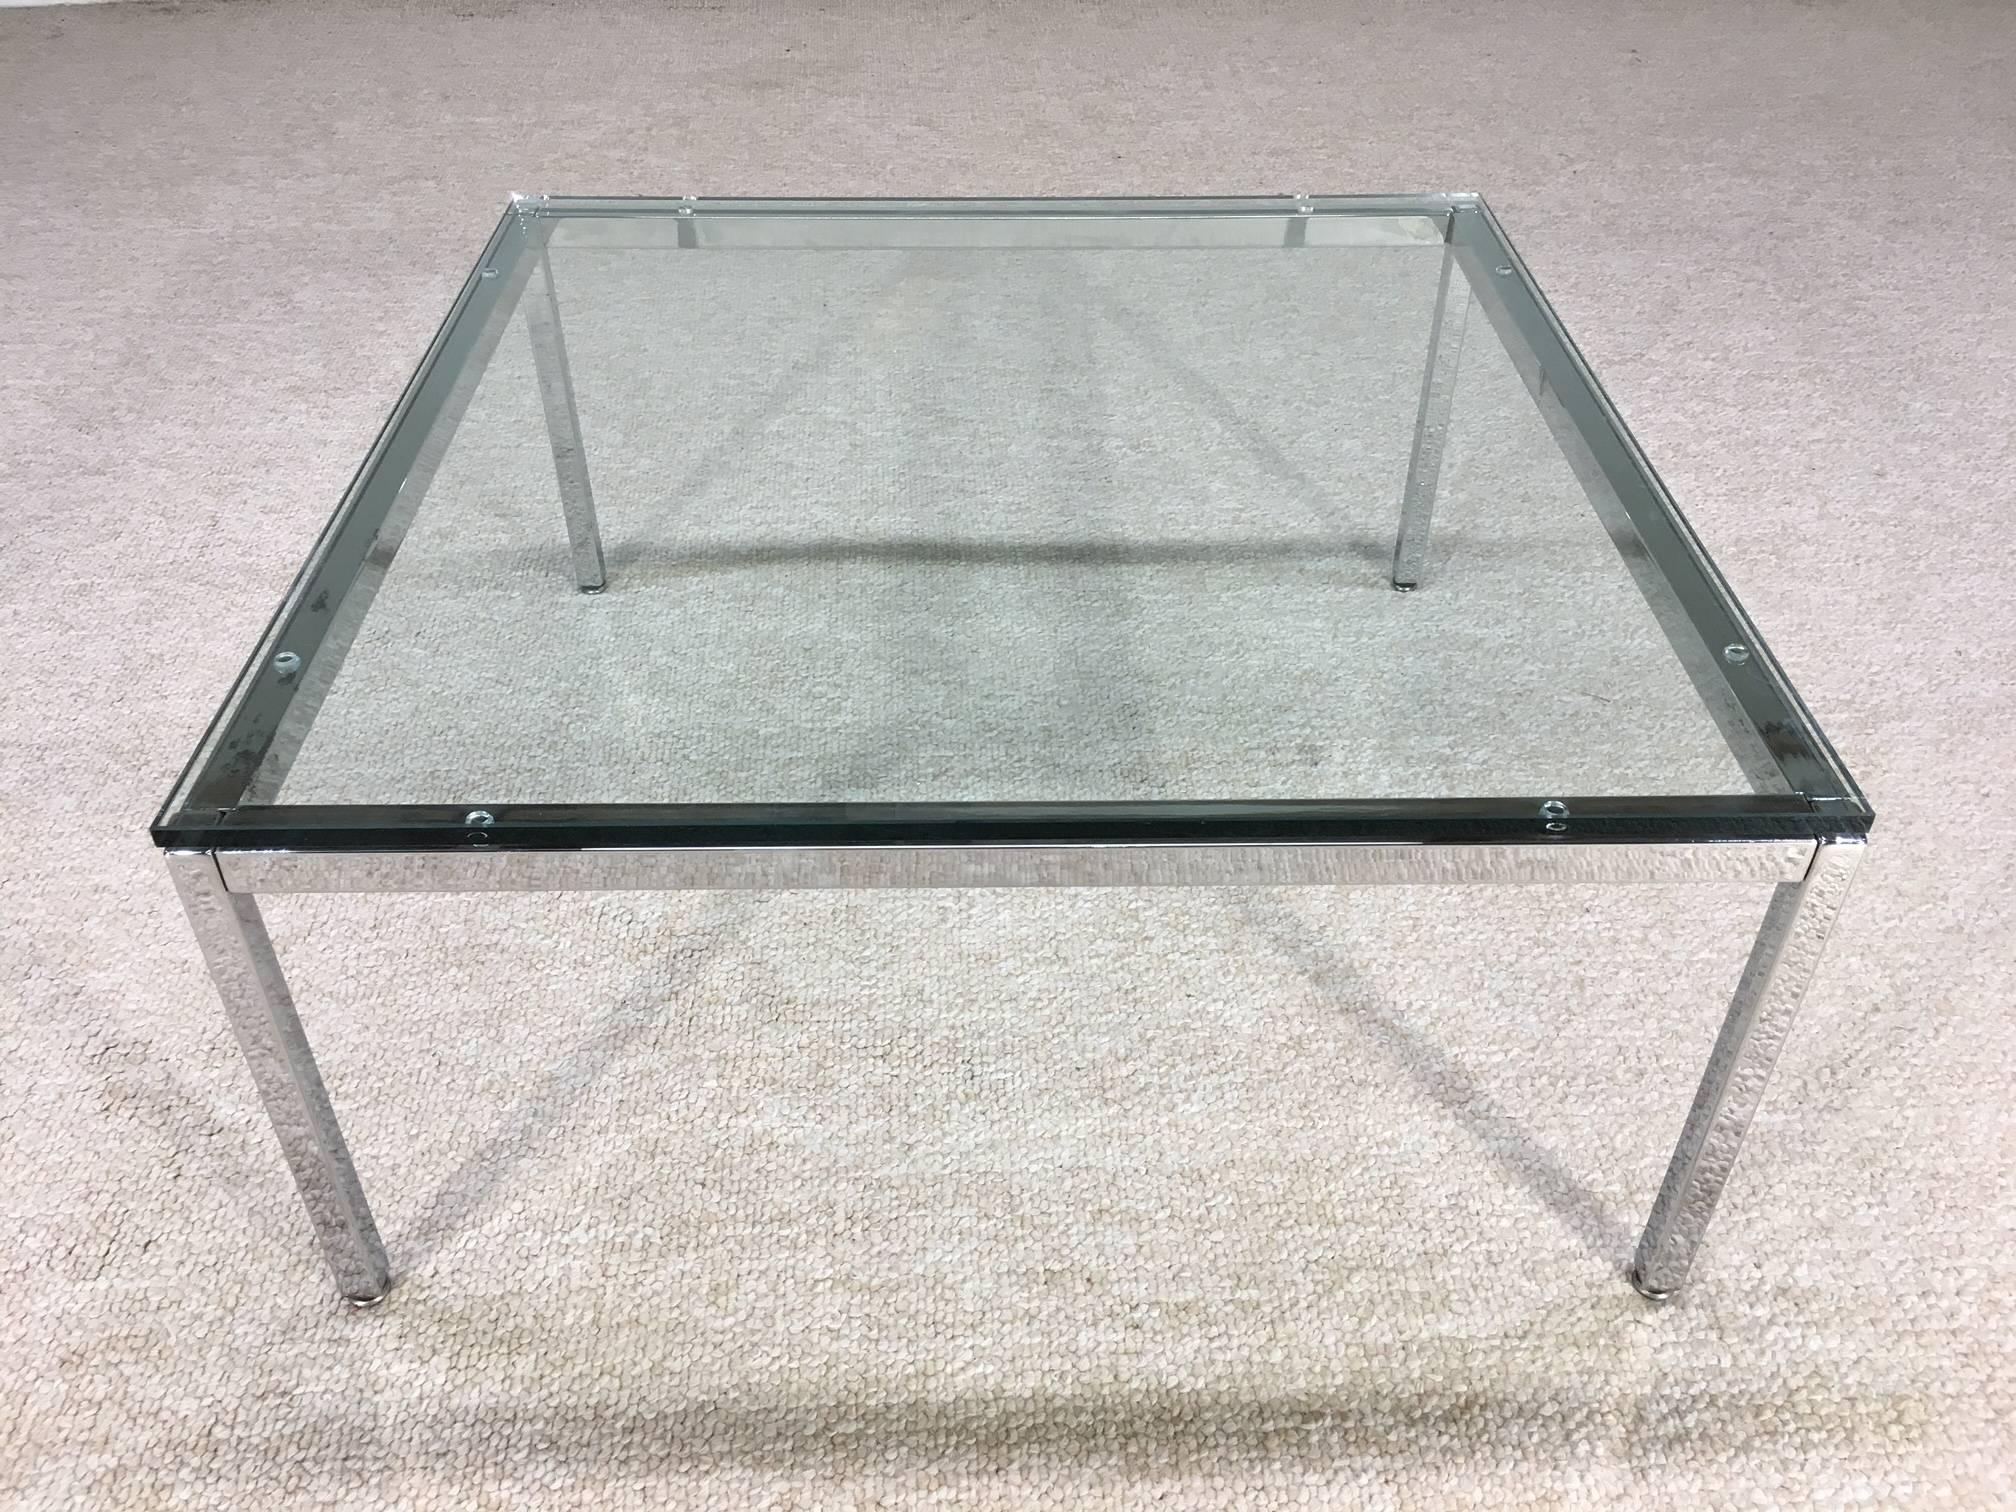 Classic design by Florence Knoll having 1/2" thick glass top with chromed steel frame.